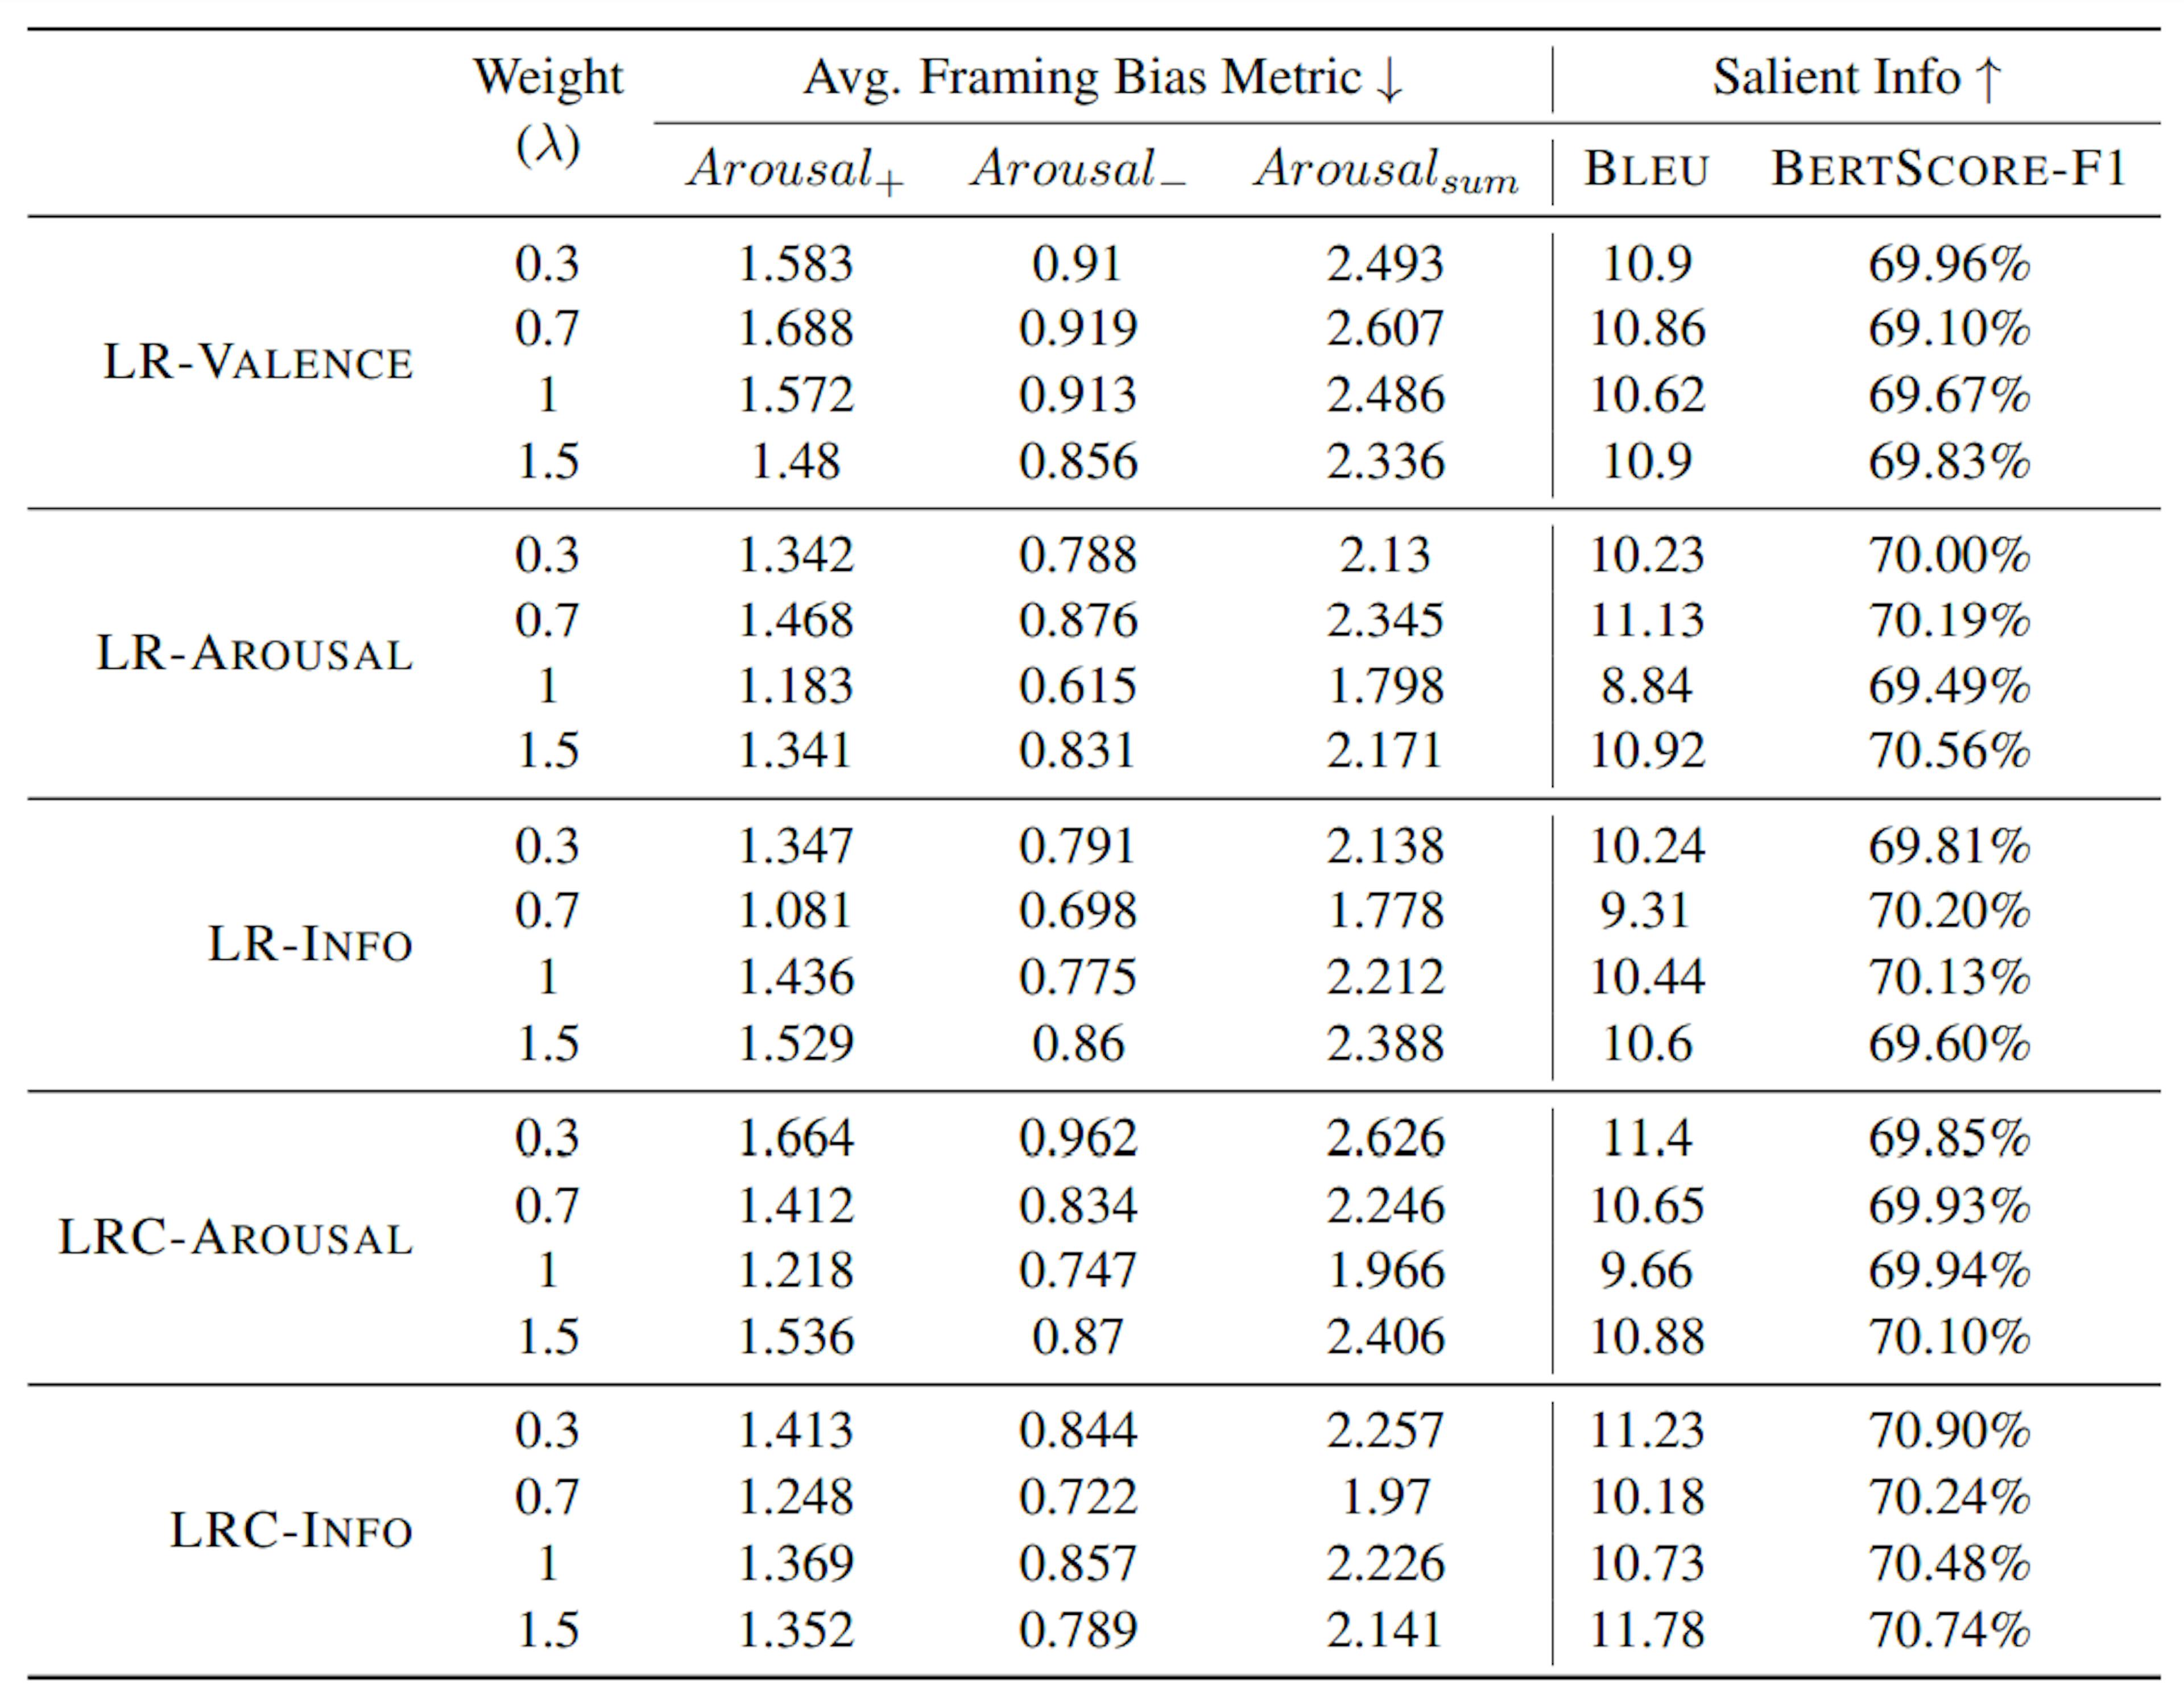 Table 5: Experimental results for our models with proposed polarity minimization loss, LR-VALENCE, LRAROUSAL, LR-INFO, LRC-AROUSAL, LRC-INFO, with varying weights (λ). For framing bias metric, the lower number is the better (↓). For other scores, the higher number is the better (↑). The results of our models with polarity minimization loss (those denote with +) are reported with best λ. Full exploration of λ is available in Appendix and Fig. 2